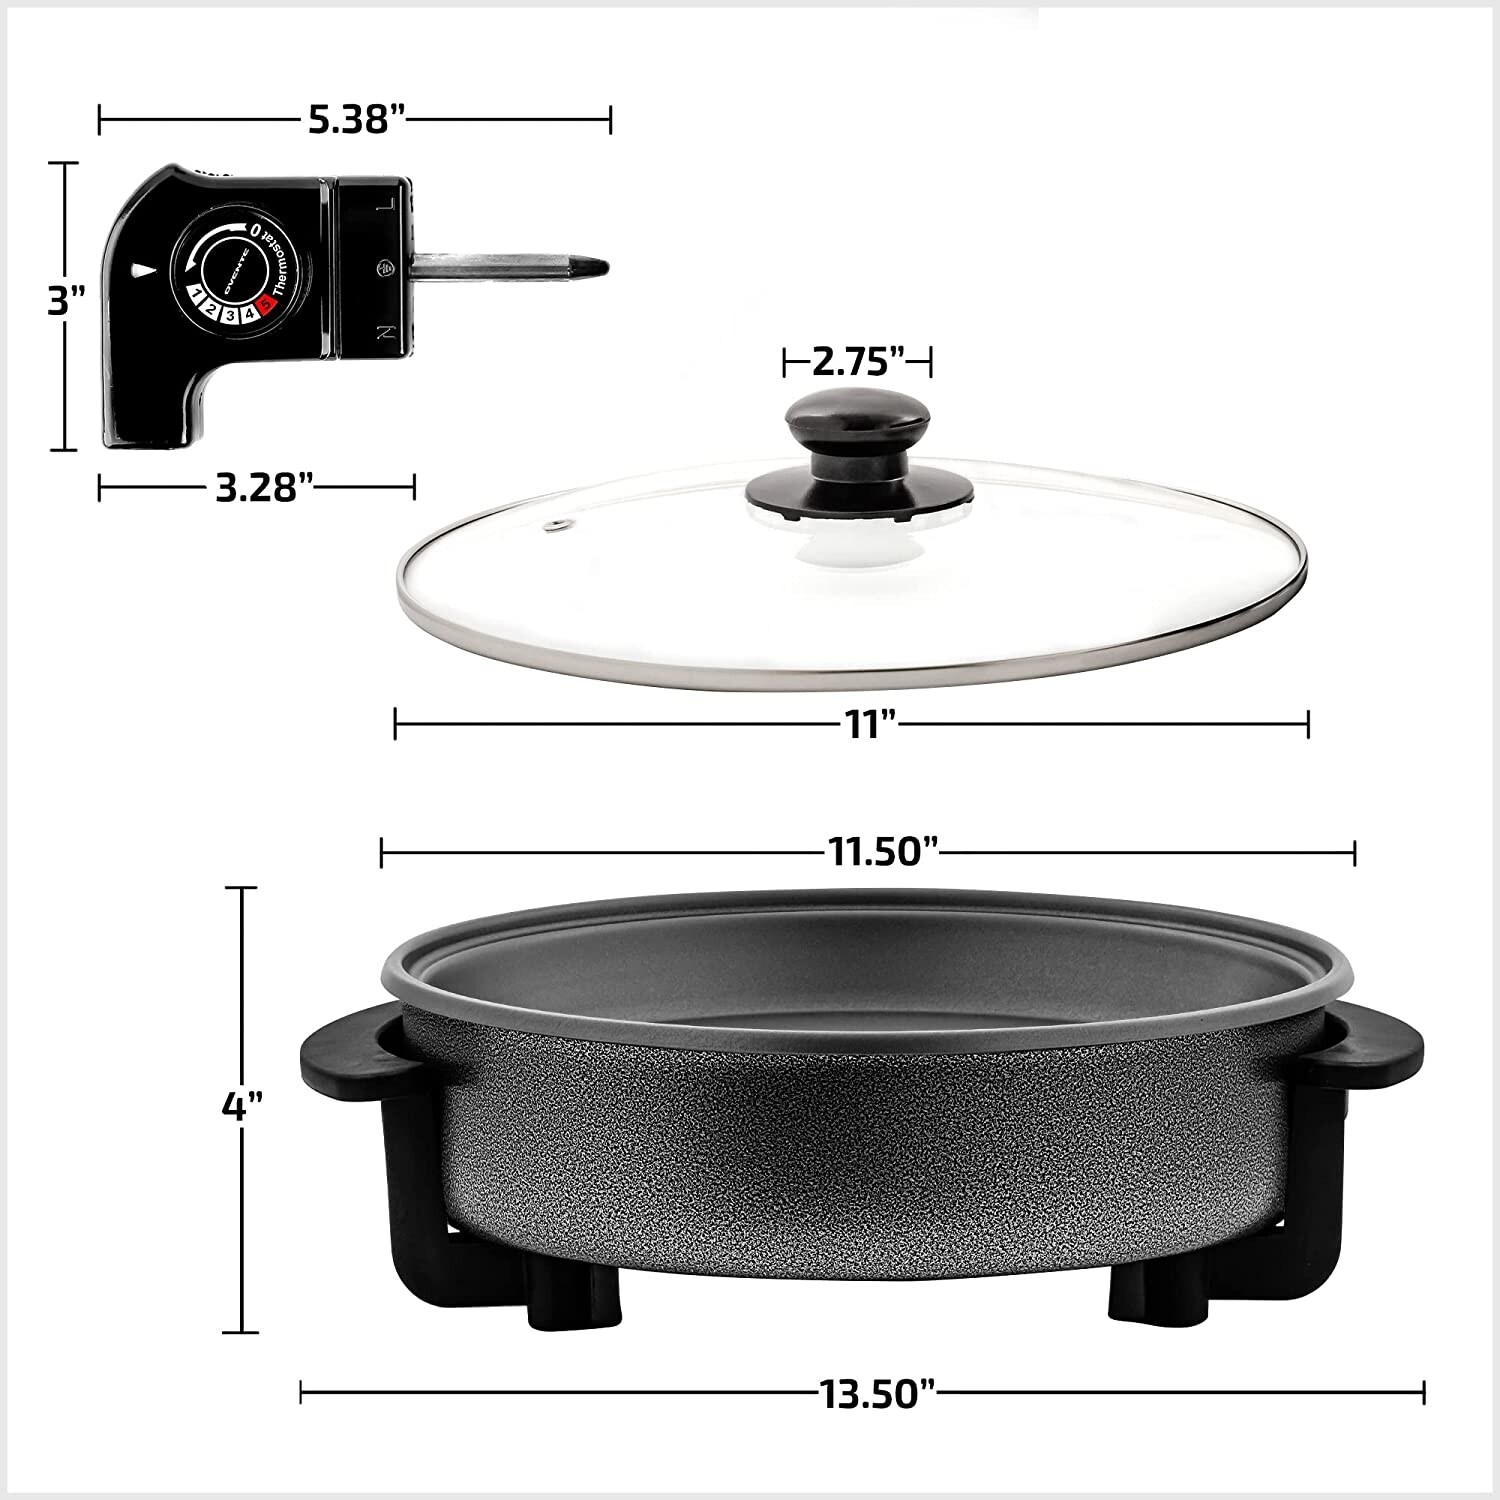 https://ak1.ostkcdn.com/images/products/is/images/direct/ae02a07859f0191a90bf0d8b4a7a3b8456cb5524/Ovente-12-Inch-Electric-Skillet%2C-SK11112-Series.jpg